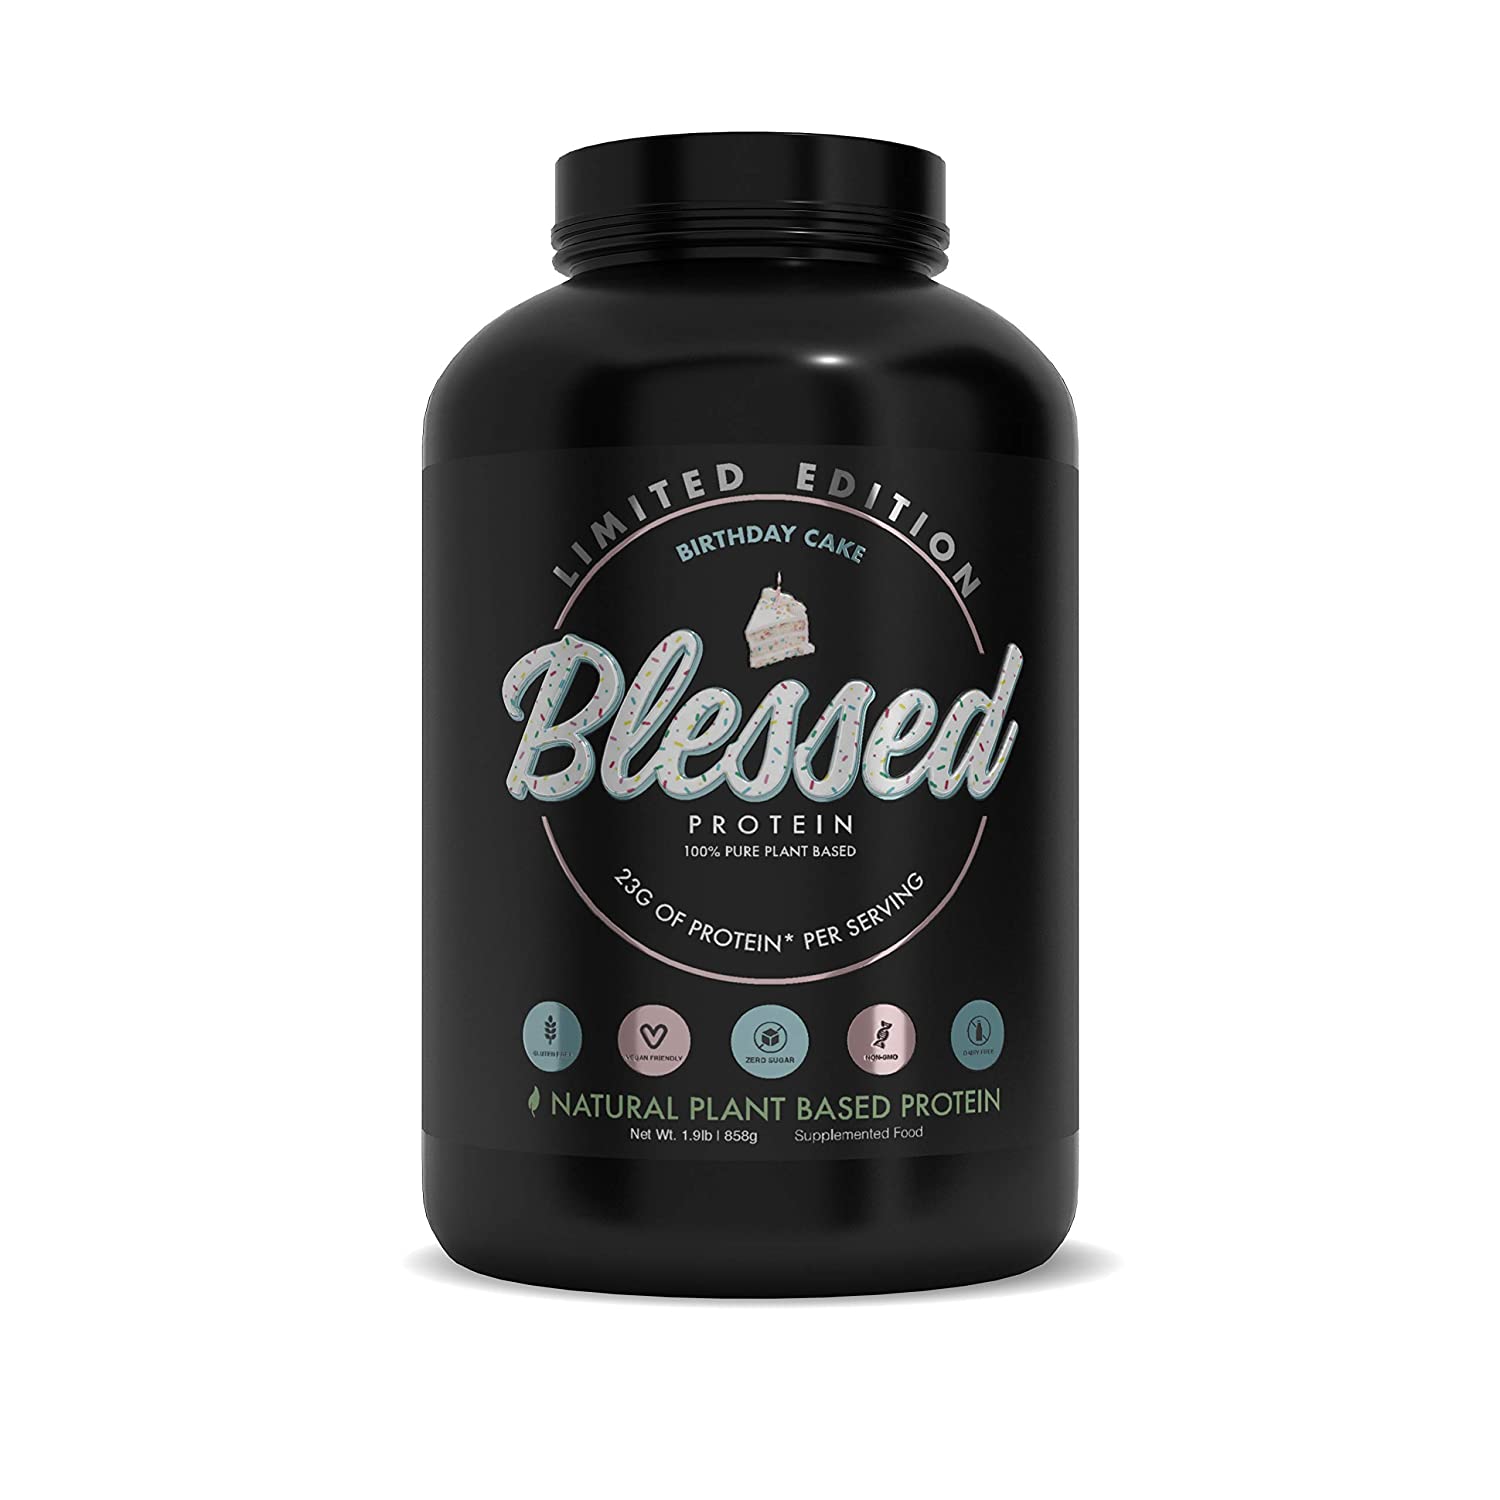 10 Top Vegan Superfood Protein Powder Review